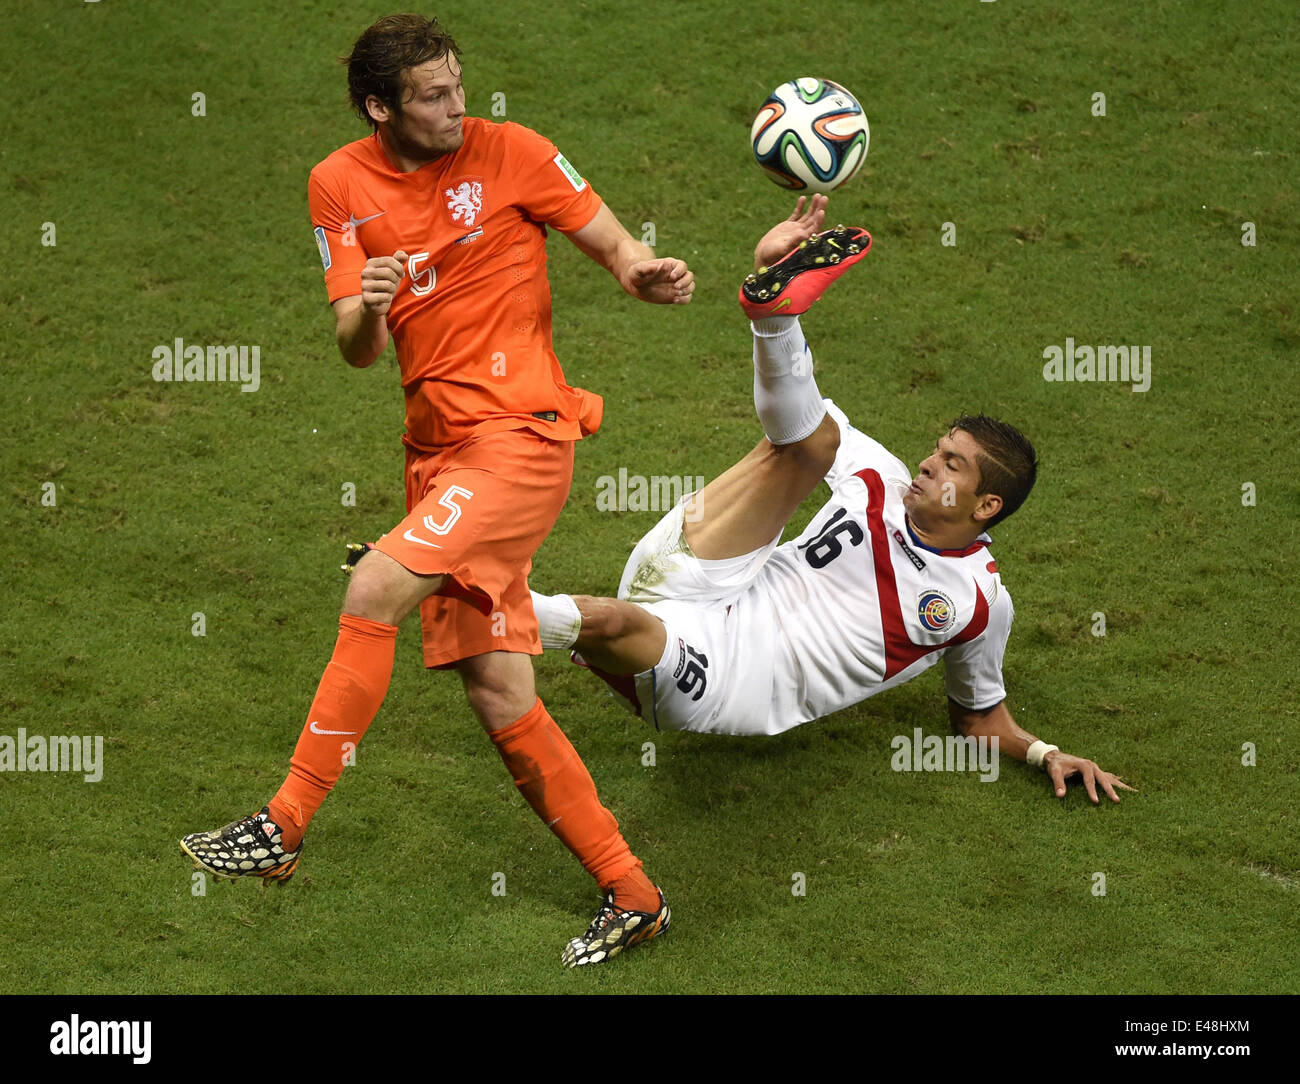 Salvador, Brazil. 5th July, 2014. Netherlands' Daley Blind (L) vies with Costa Rica's Christian Gamboa during a quarter-finals match between Netherlands and Costa Rica of 2014 FIFA World Cup at the Arena Fonte Nova Stadium in Salvador, Brazil, on July 5, 2014. Credit:  Yang Lei/Xinhua/Alamy Live News Stock Photo